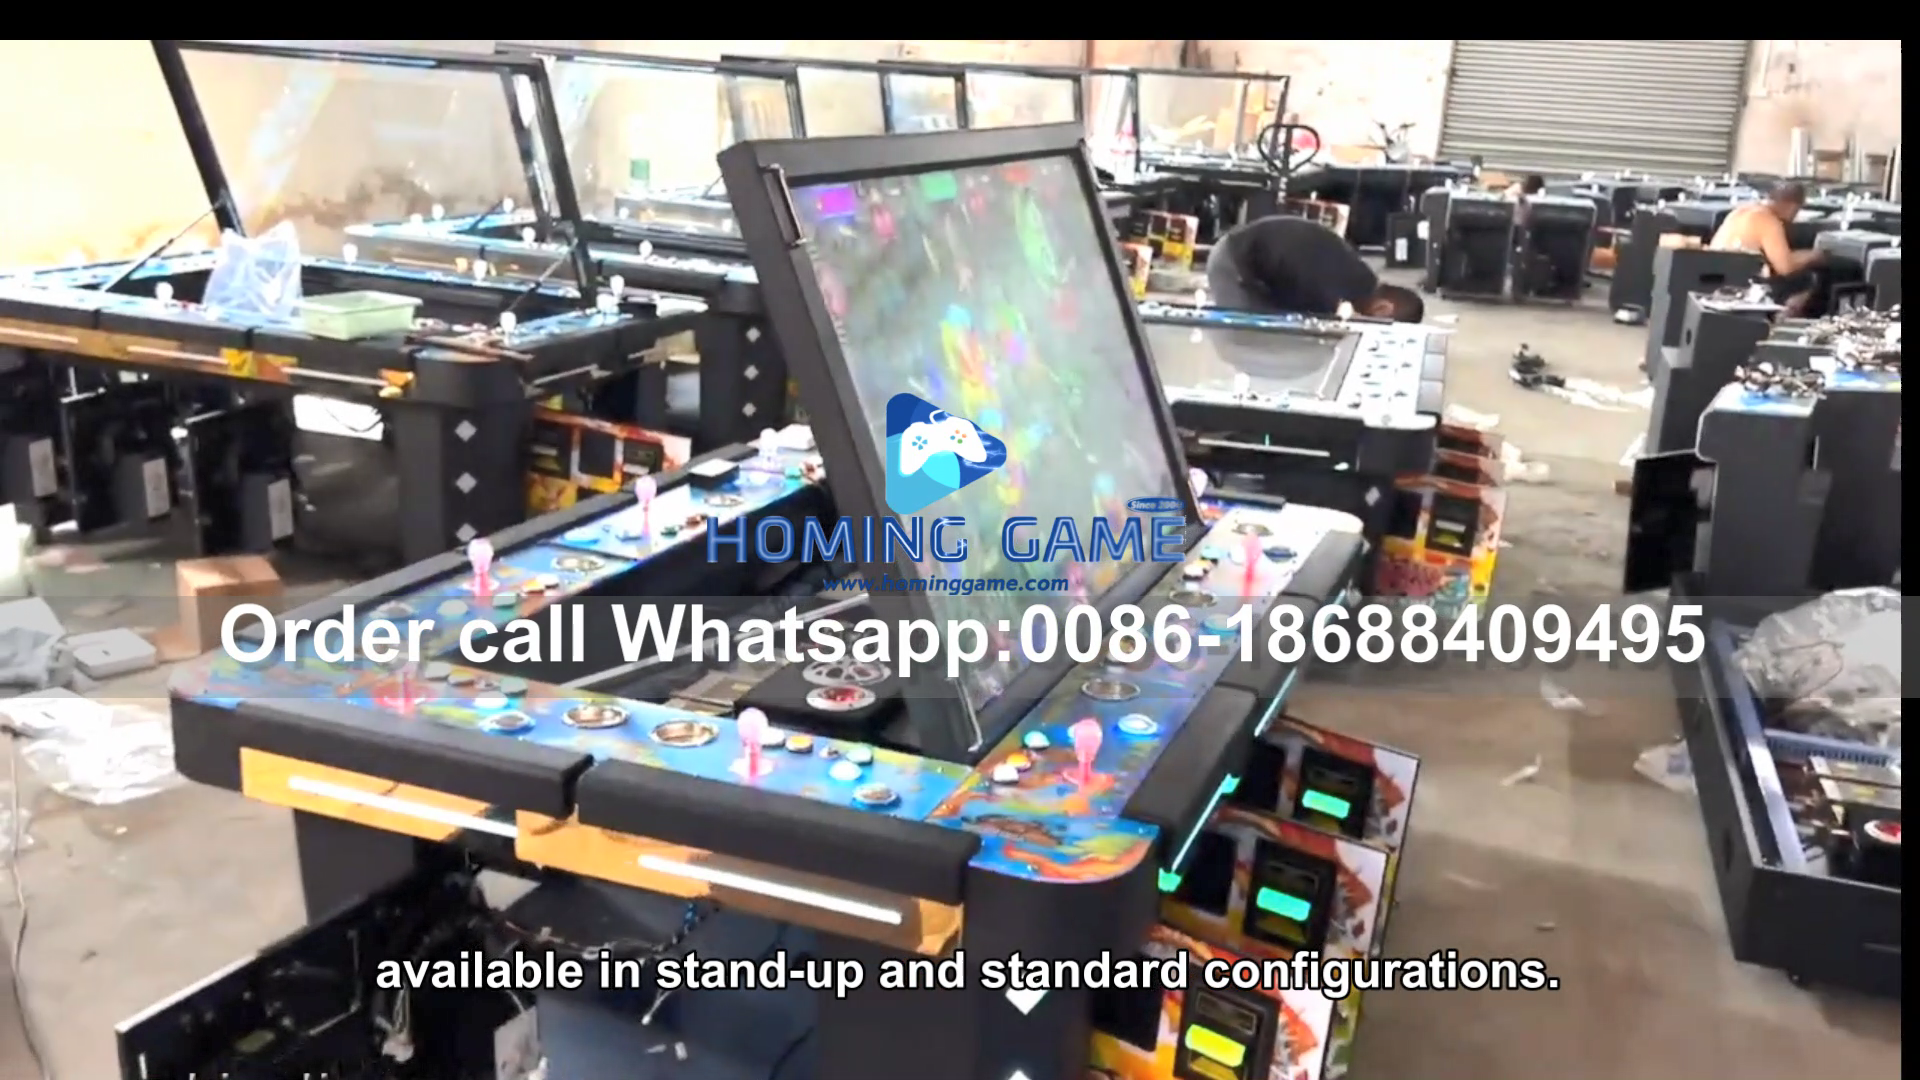 Explore the Best Fishing Table Game Machines with HomingGame! #FishingGame#FishingTableGameMachine(Order Call Whatsapp:0086-18688409495)